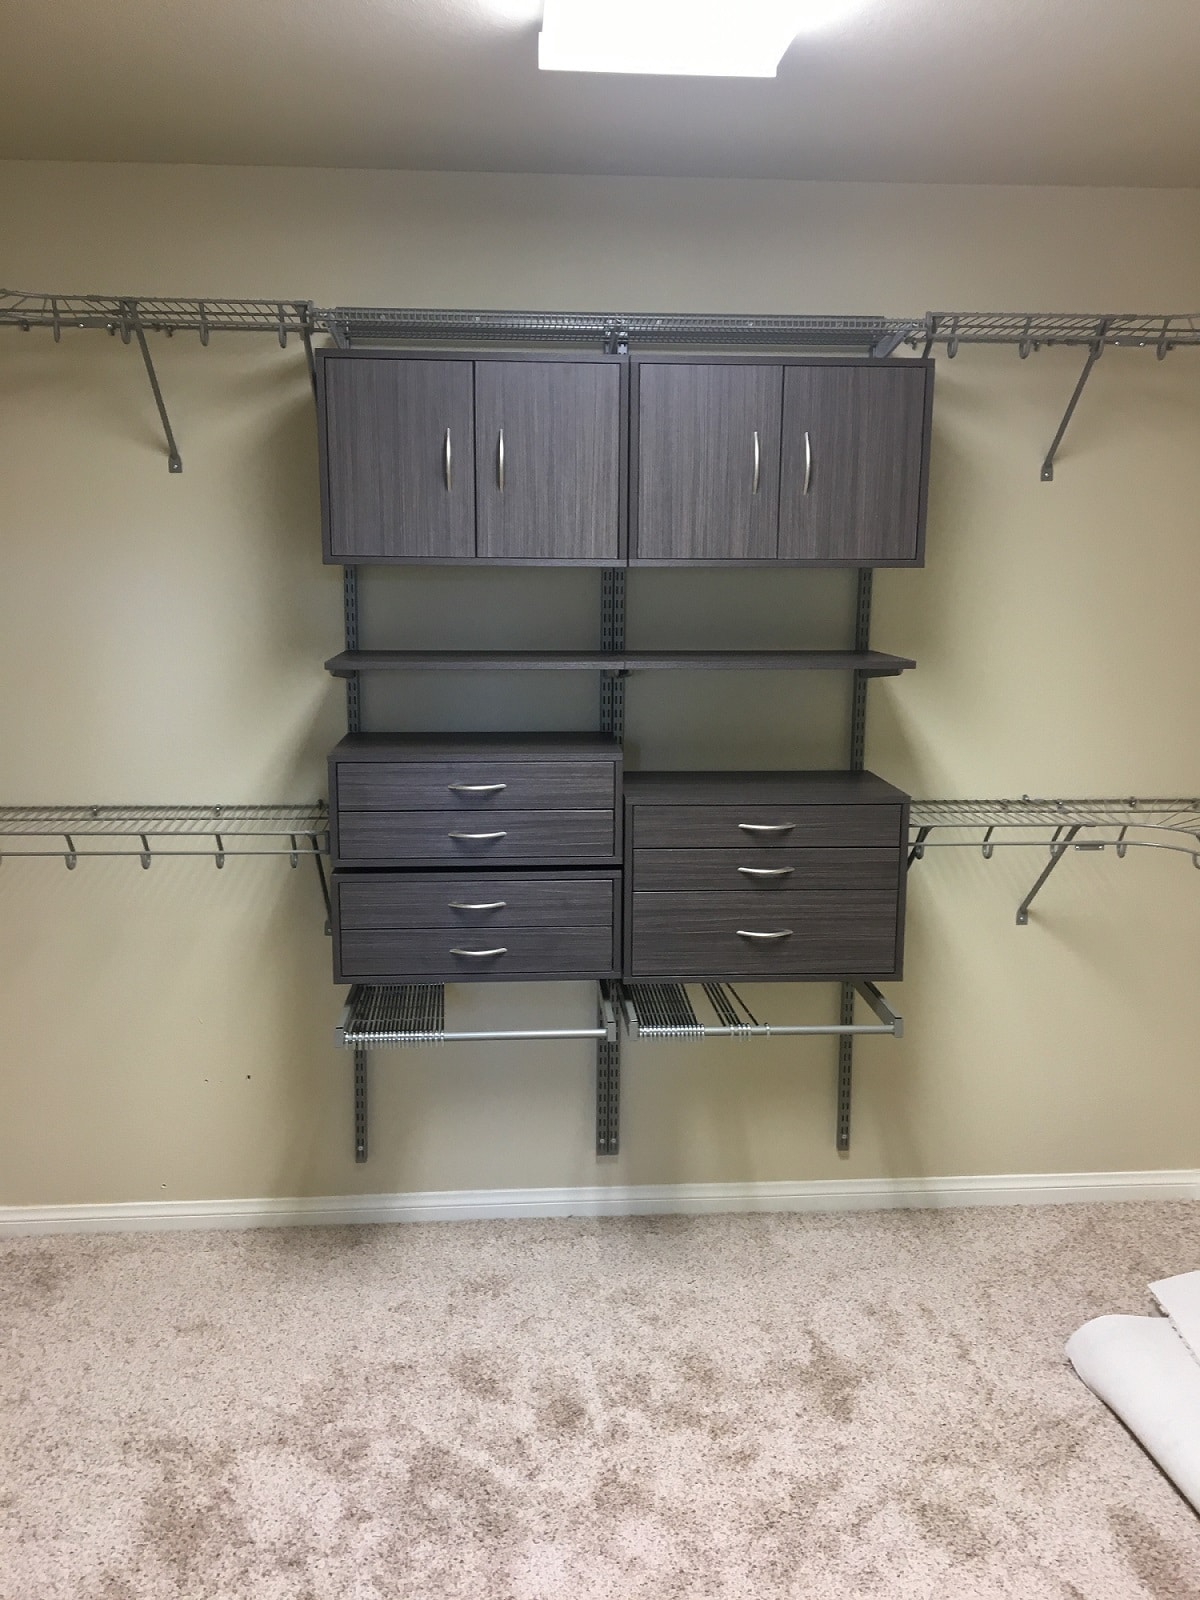 freedomRail Affordable Closet Systems